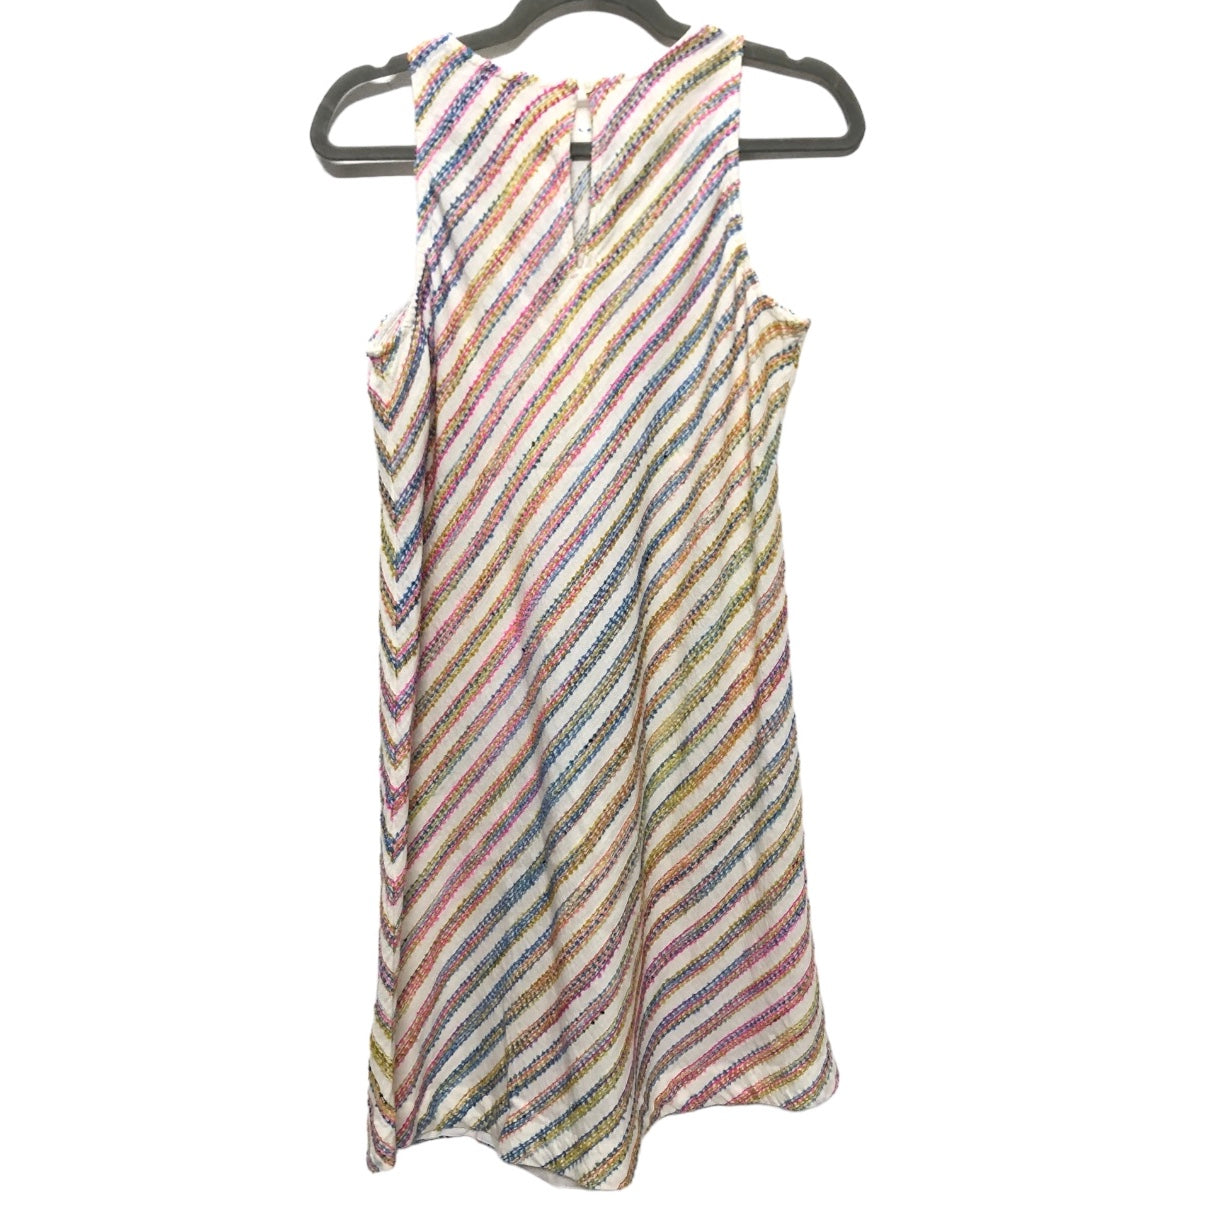 Multi-colored Dress Casual Short Lou And Grey, Size S